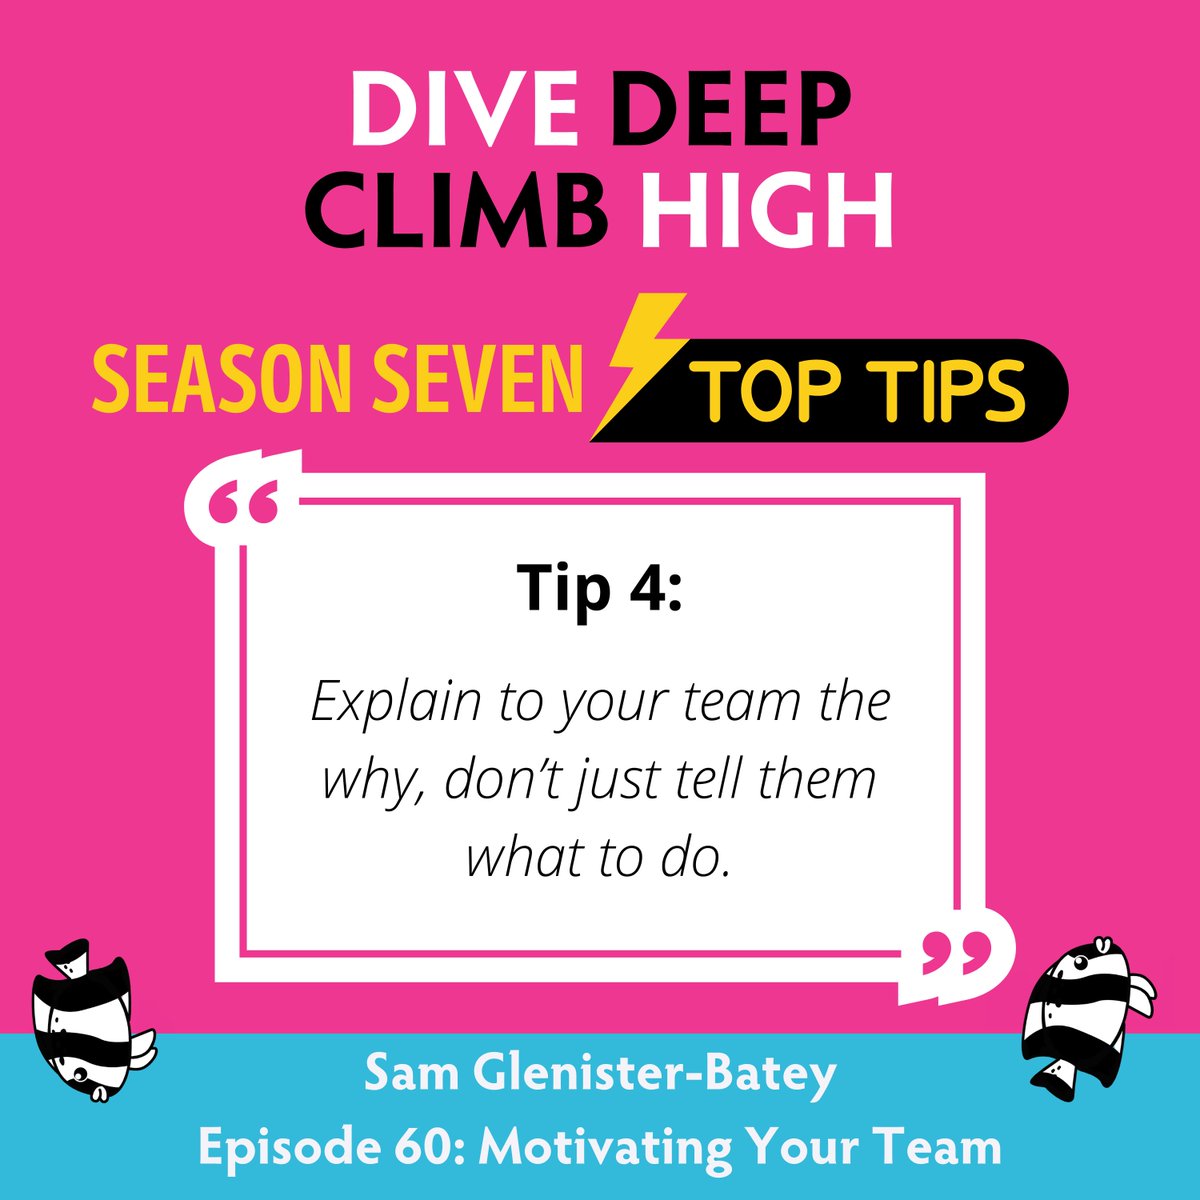 Here is the next top tip from Season 7 of the Dive Deep, Climb High #podcast🎙with Sam Glenister-Batey, Head of Conferences at @uolconferences Sam shares great tips on how to motivate your team. 🎧Take a listen at: bit.ly/3YfgcjO #LeadershipDevelopment #Motivation